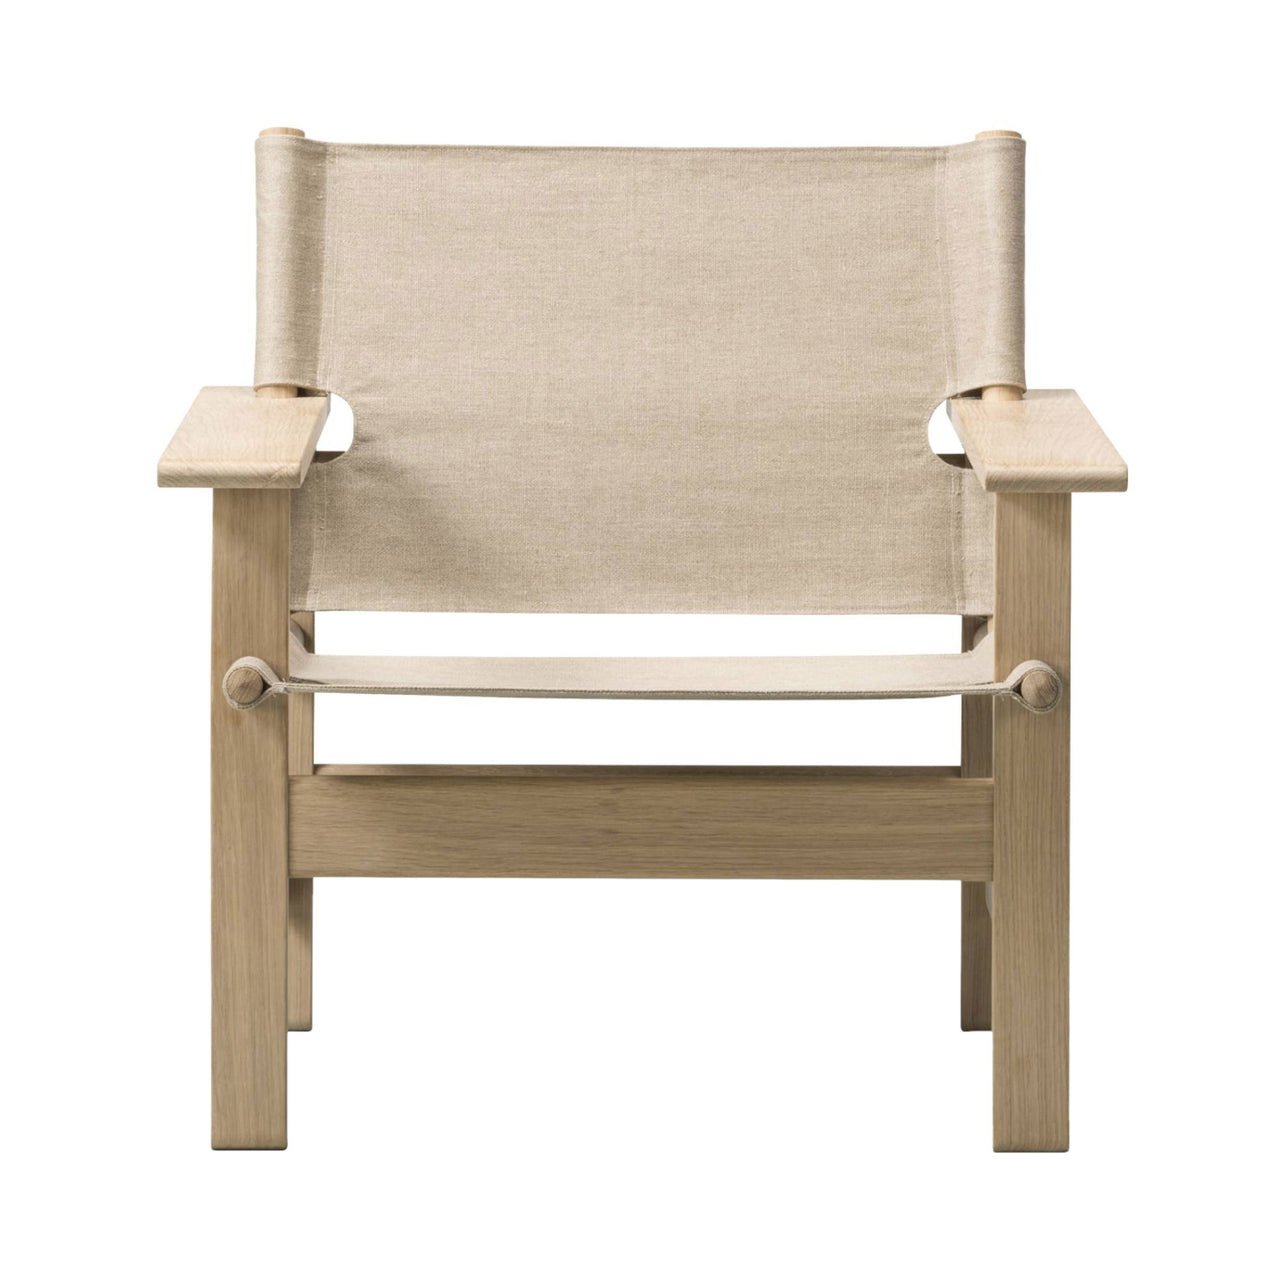 The Canvas Chair: Soaped Oak + Natural